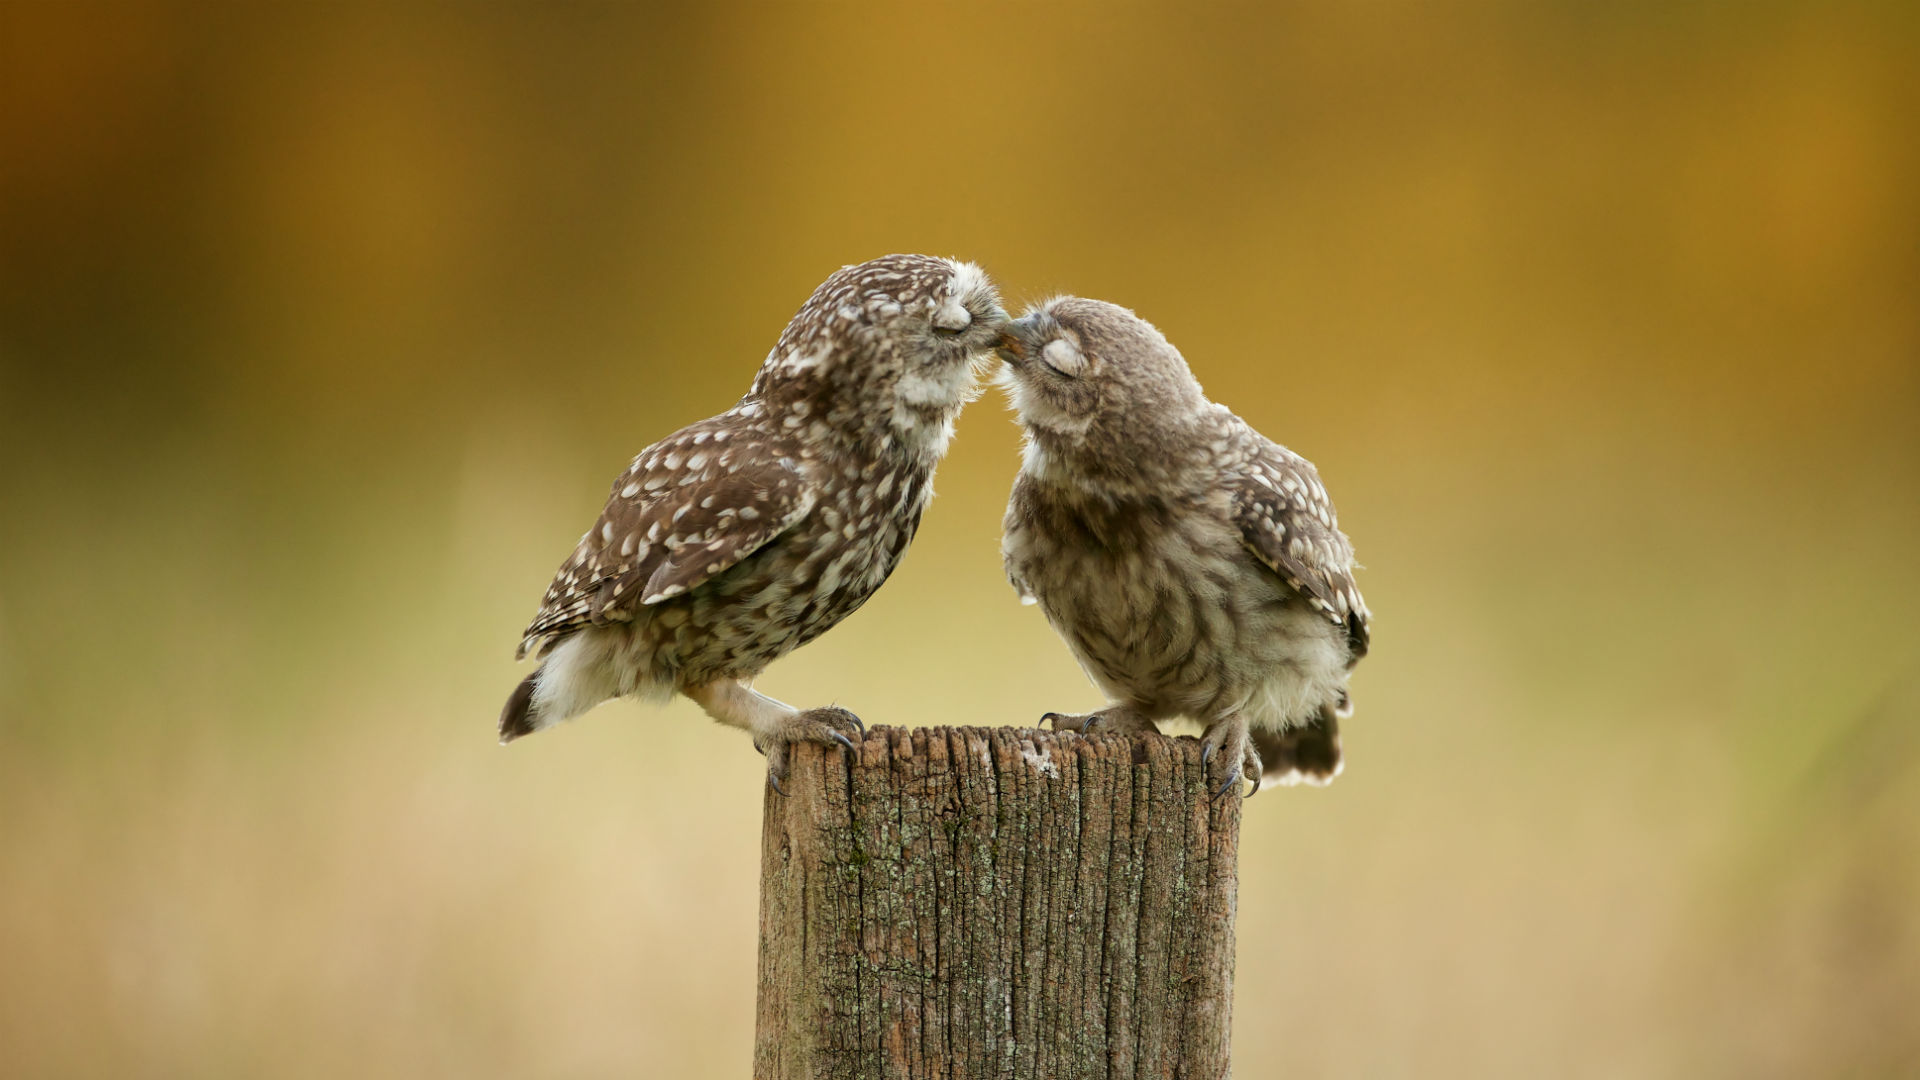 Today S Bing Wallpaper Of The Day Shows Superb Burrowing Owl